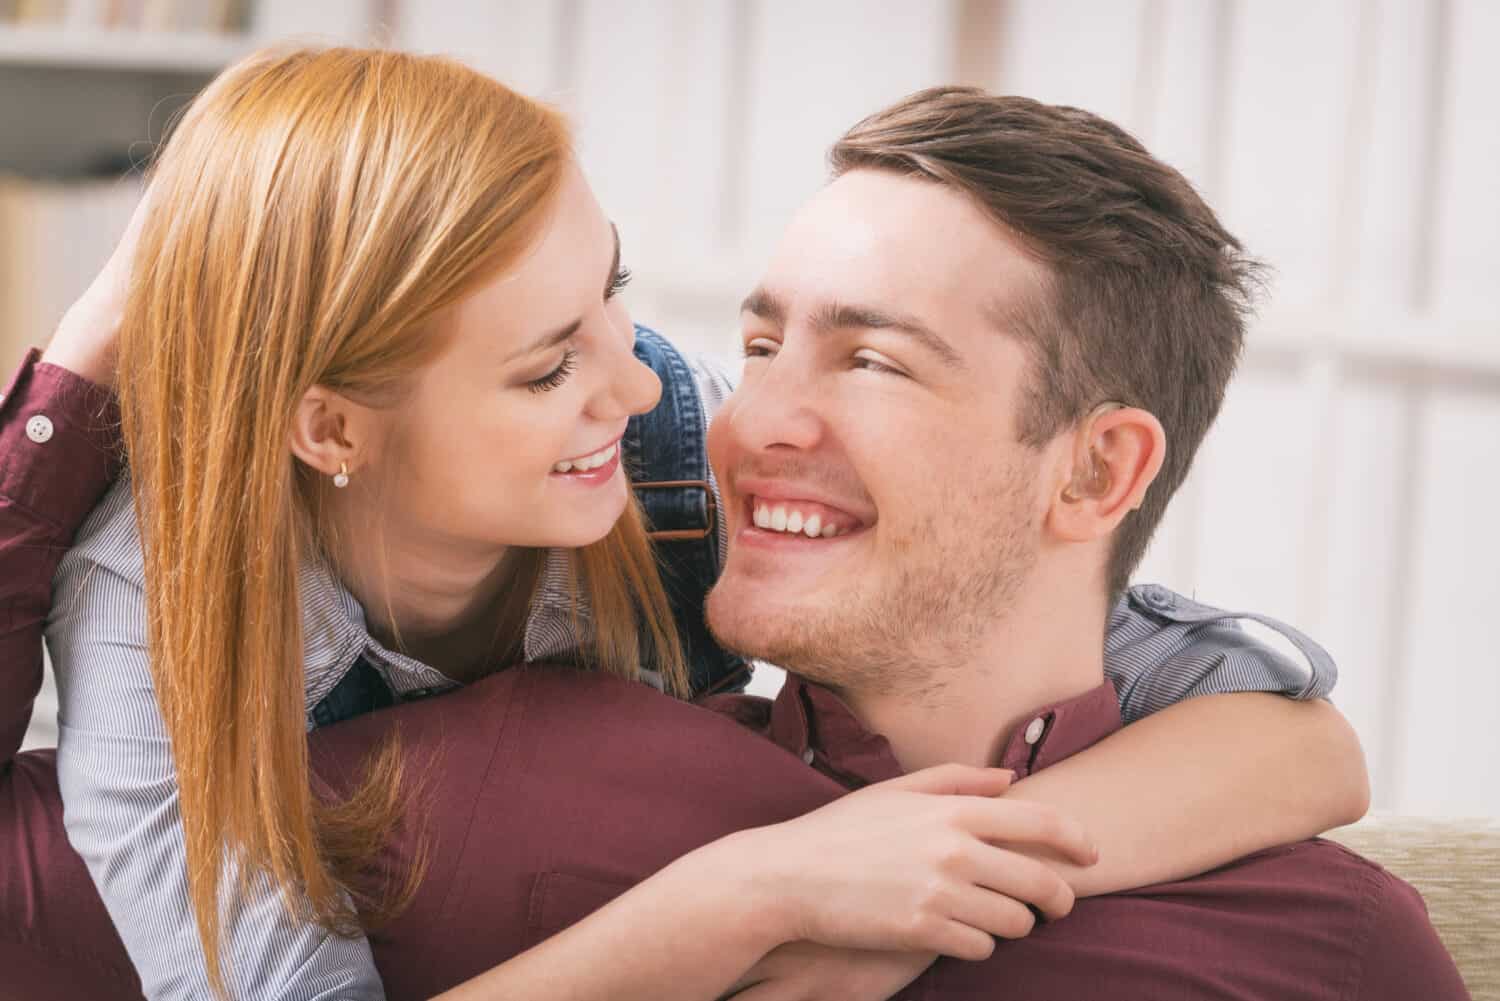 Young woman hugging a man with hearing aids